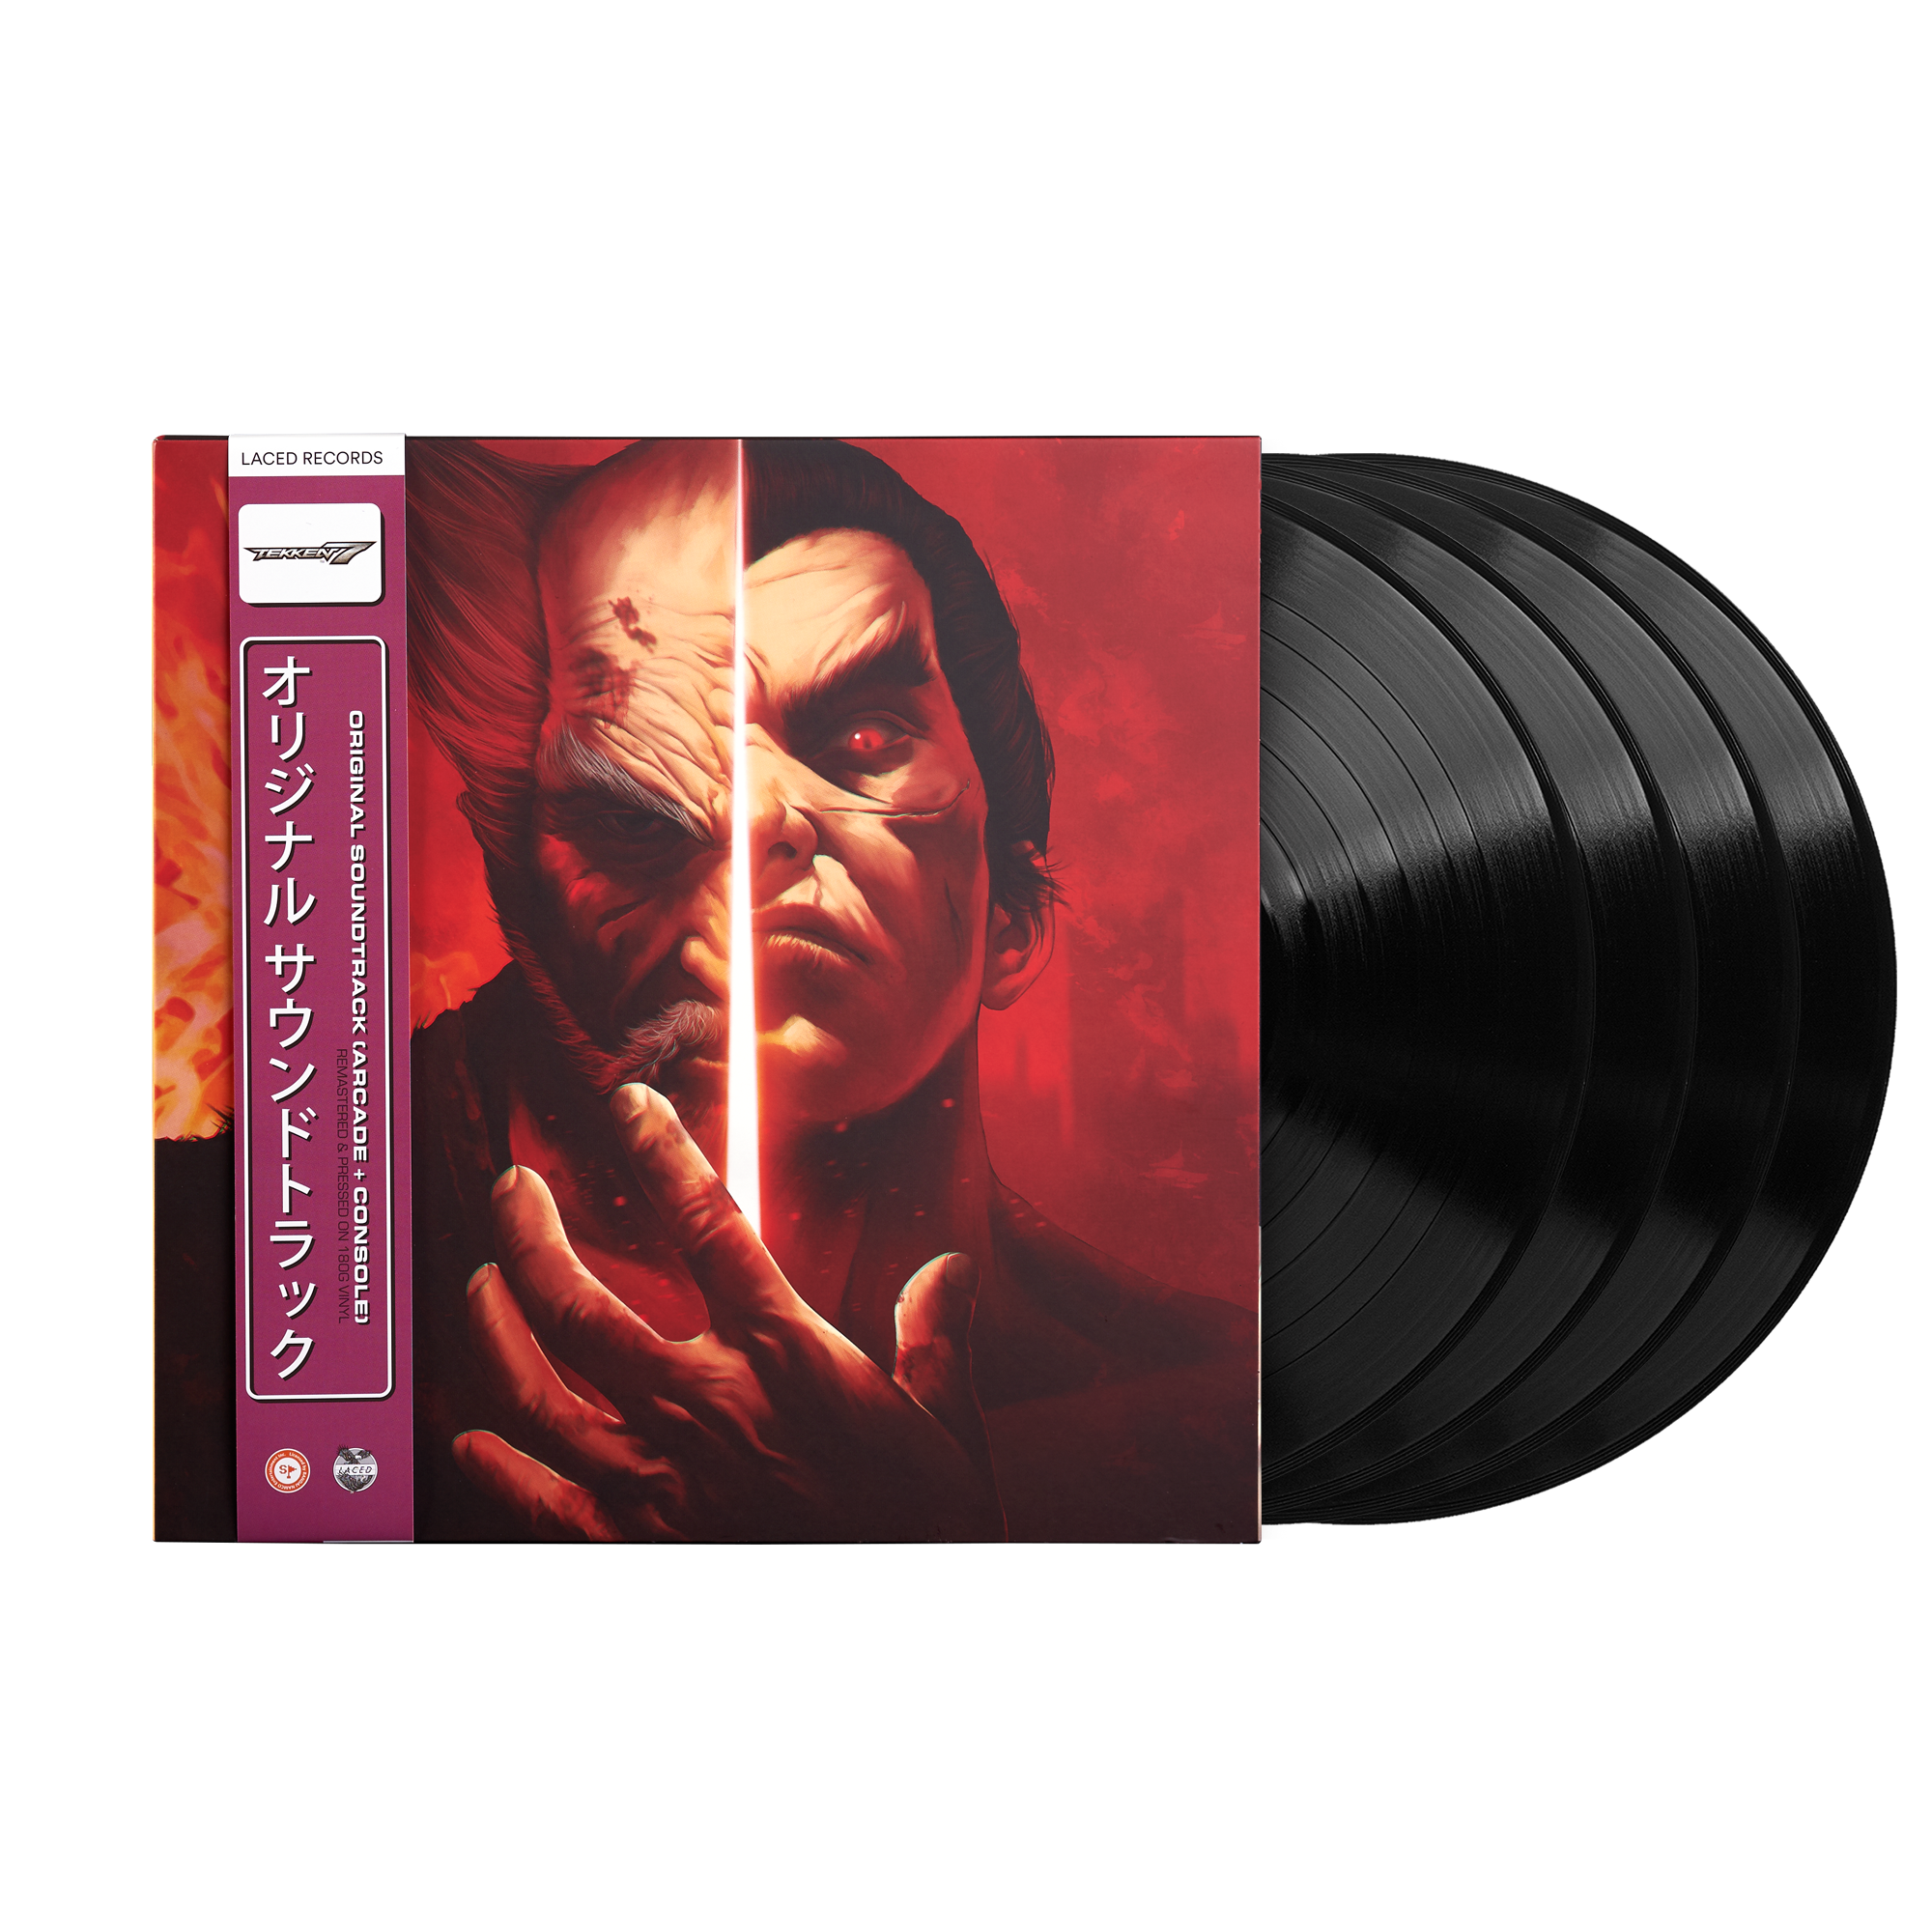 Tekken - 2 x LP Complete Video Game Score - Limited Edition - Namco